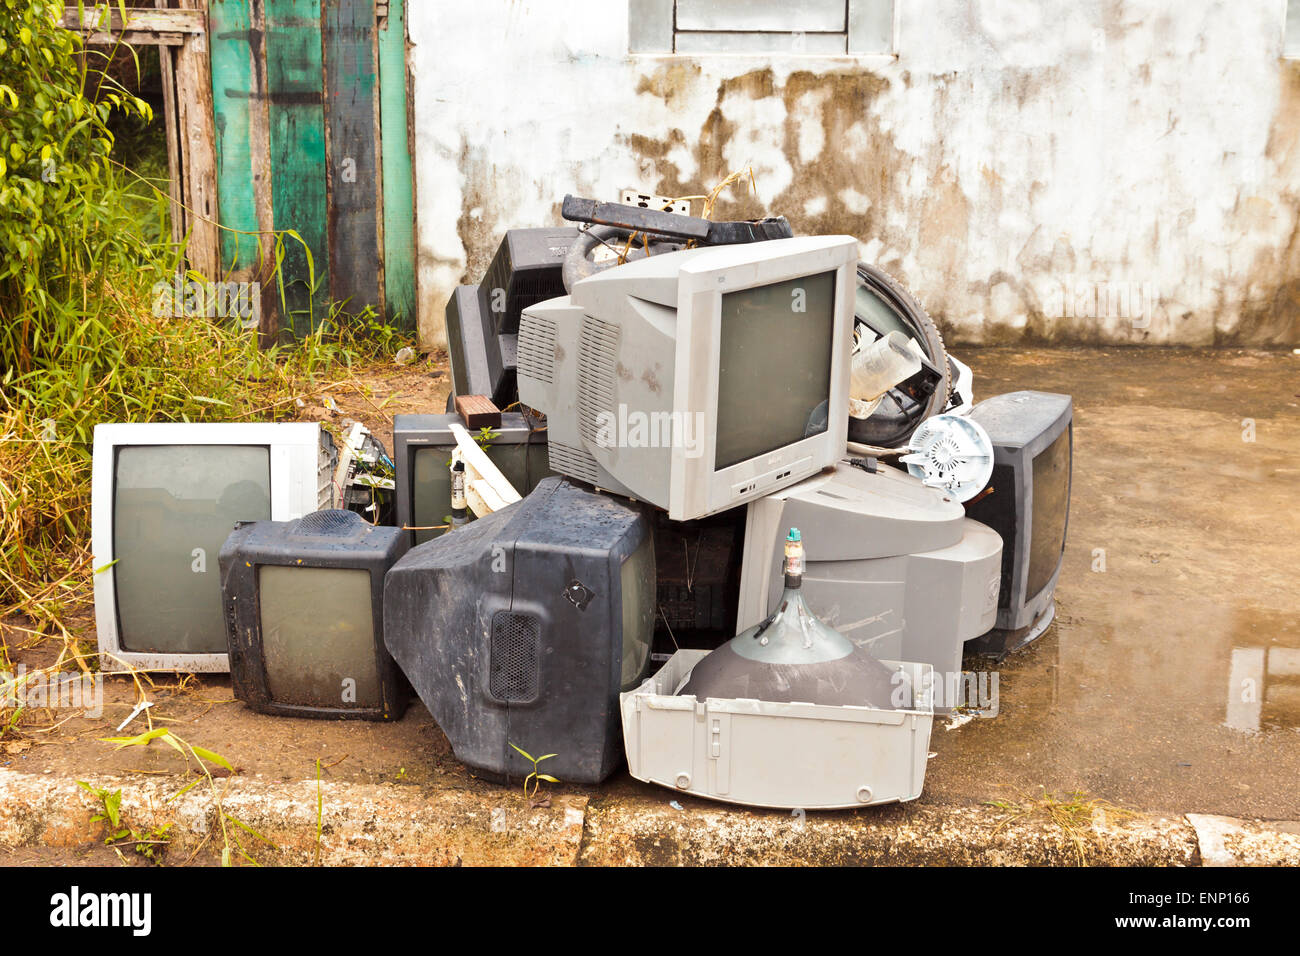 Maues Brazil recycling involves dumping old television on a street corner Stock Photo